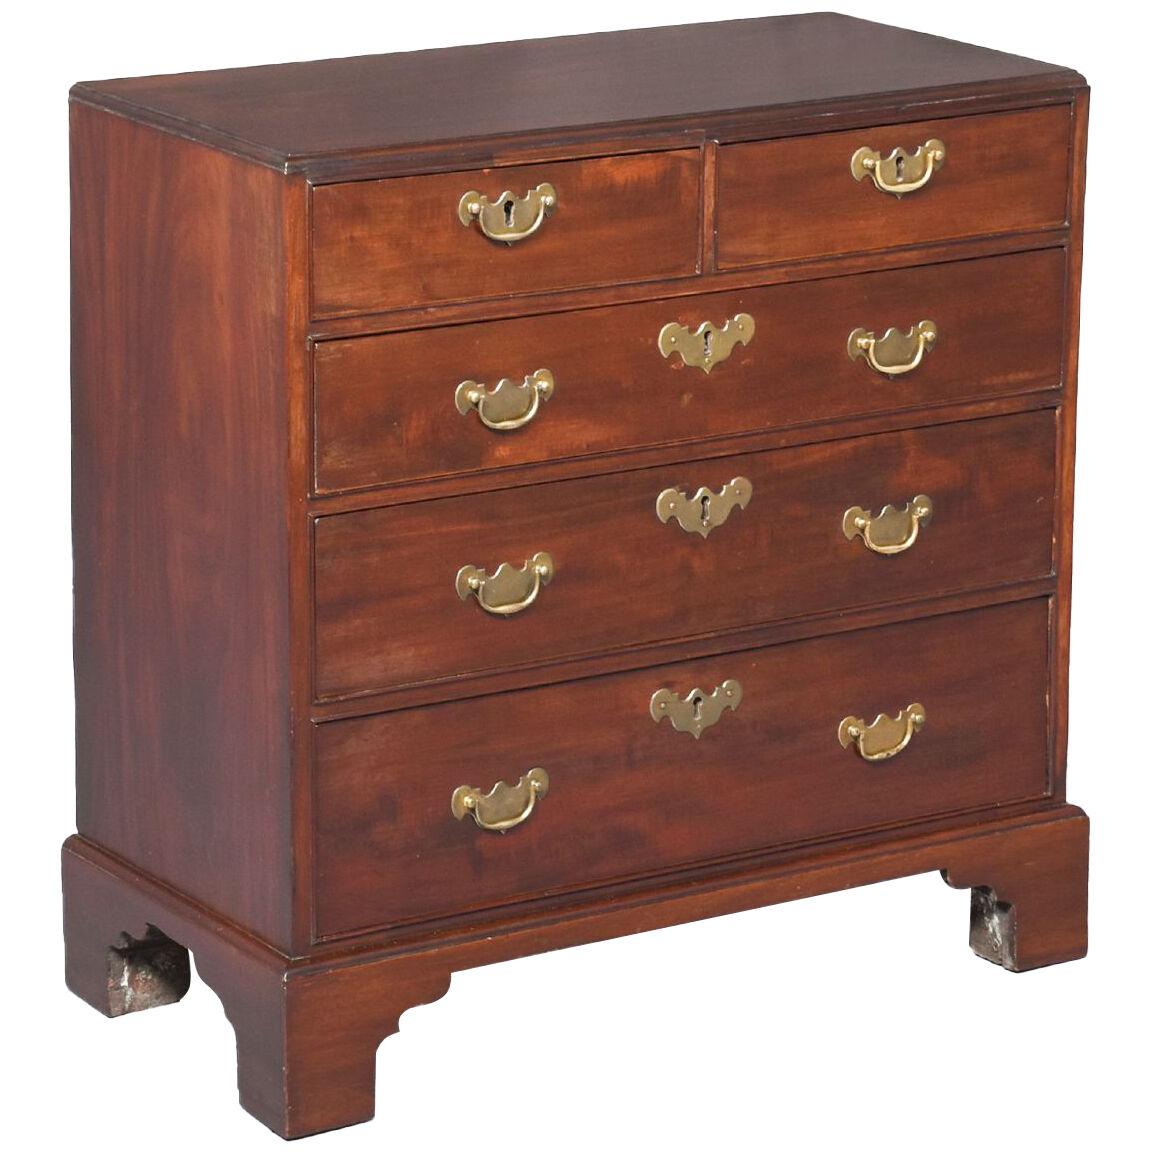 Neat-Sized George III Mahogany Chest of Drawers